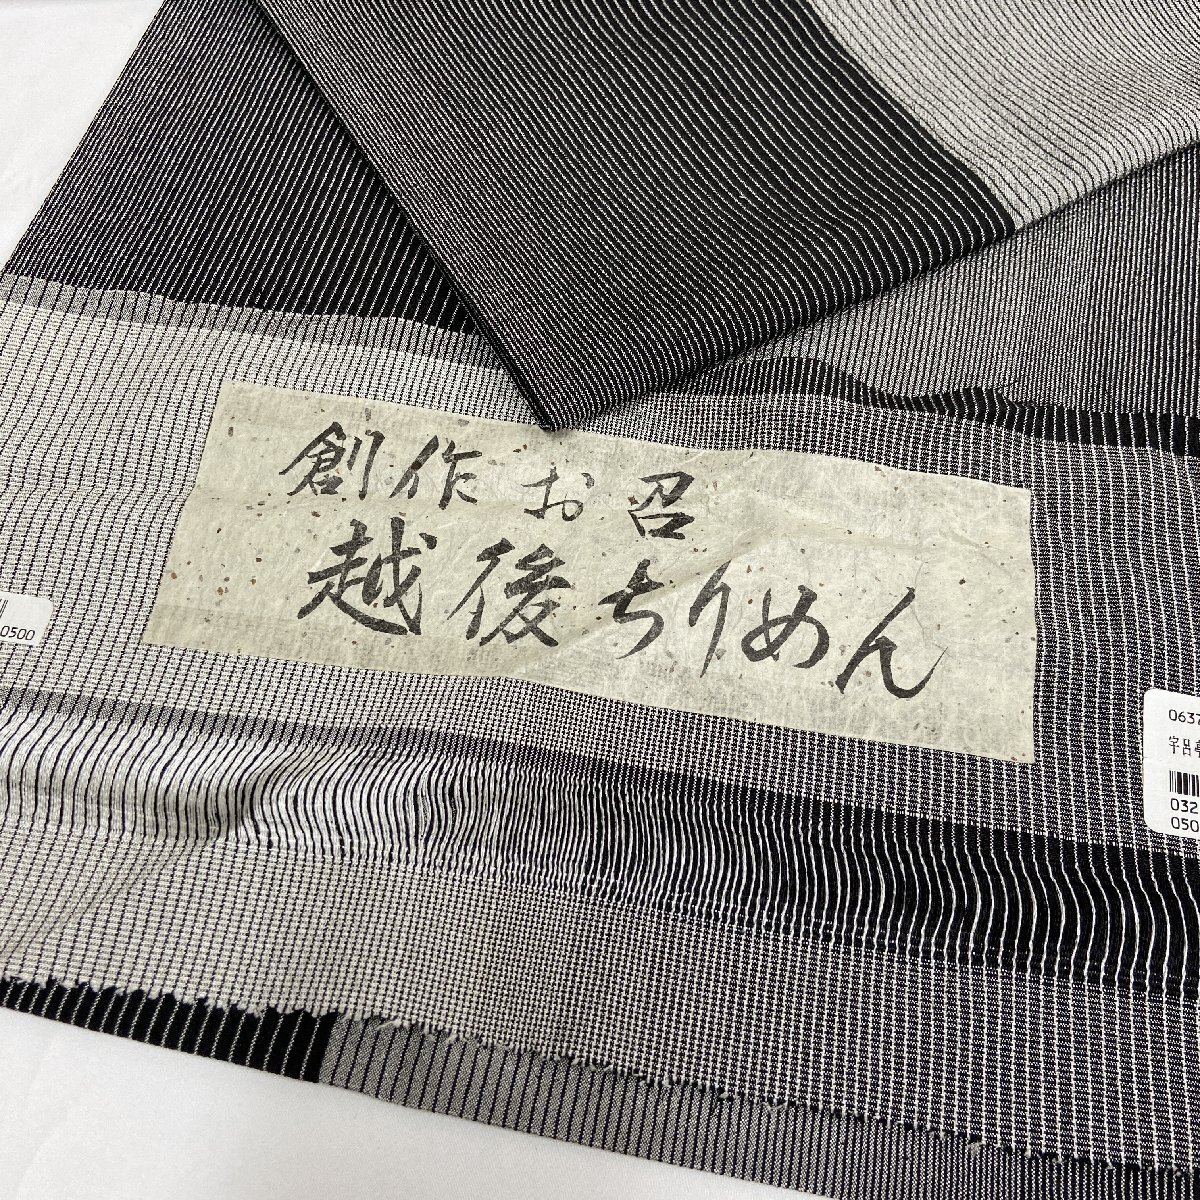  kimono month flower root wide woven thing . after crepe-de-chine single ... unused goods silk tki162